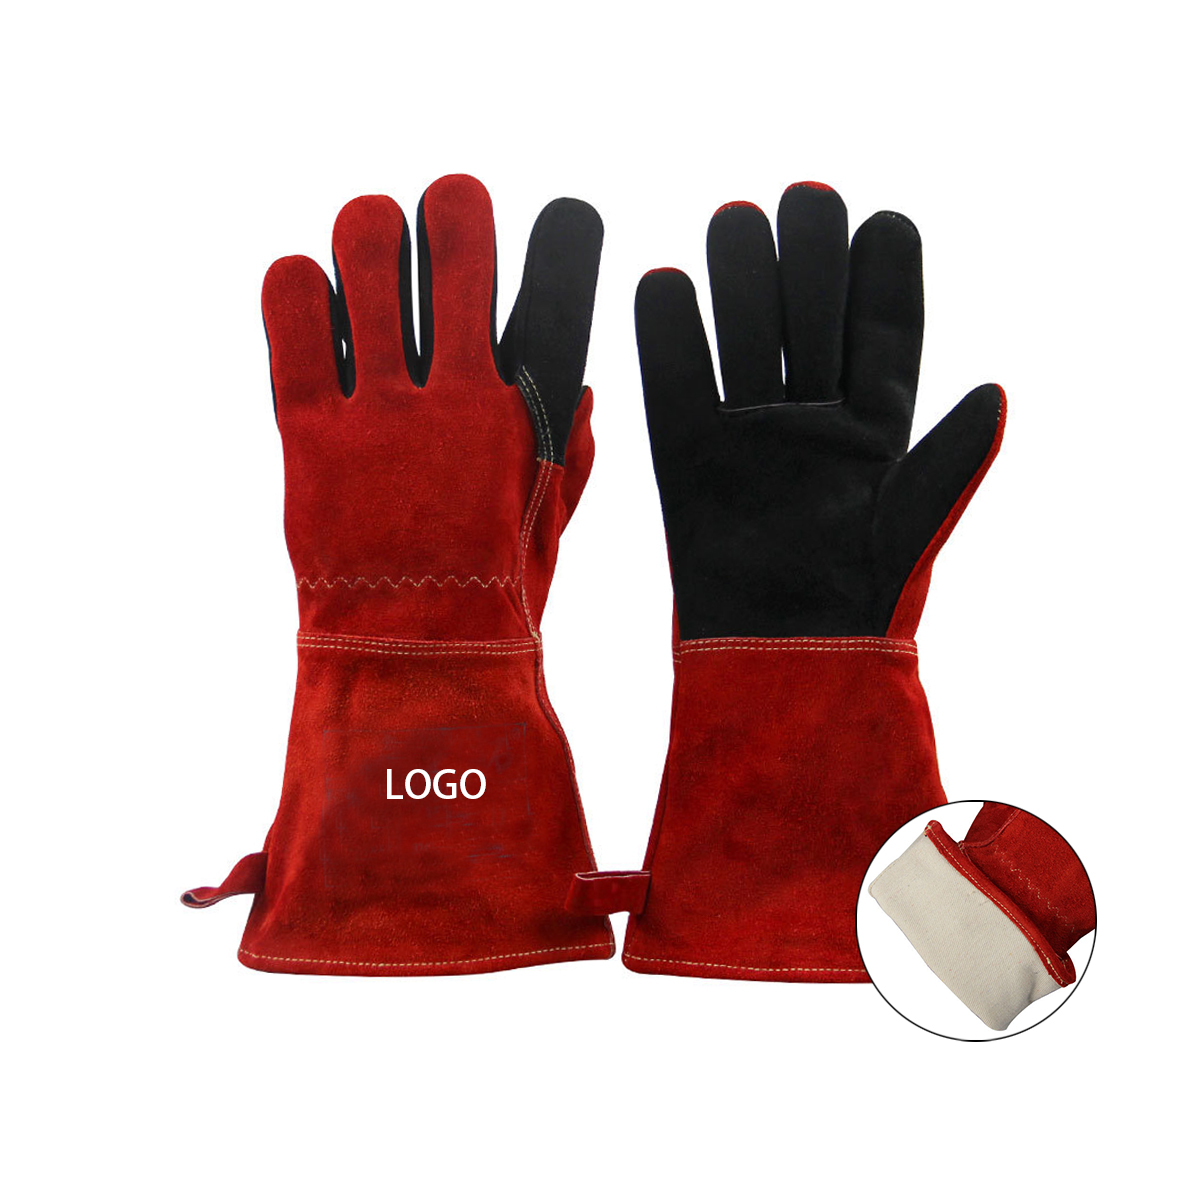 Mataas na Kalidad ng Cow Leather Working Gloves/factory Working Gloves